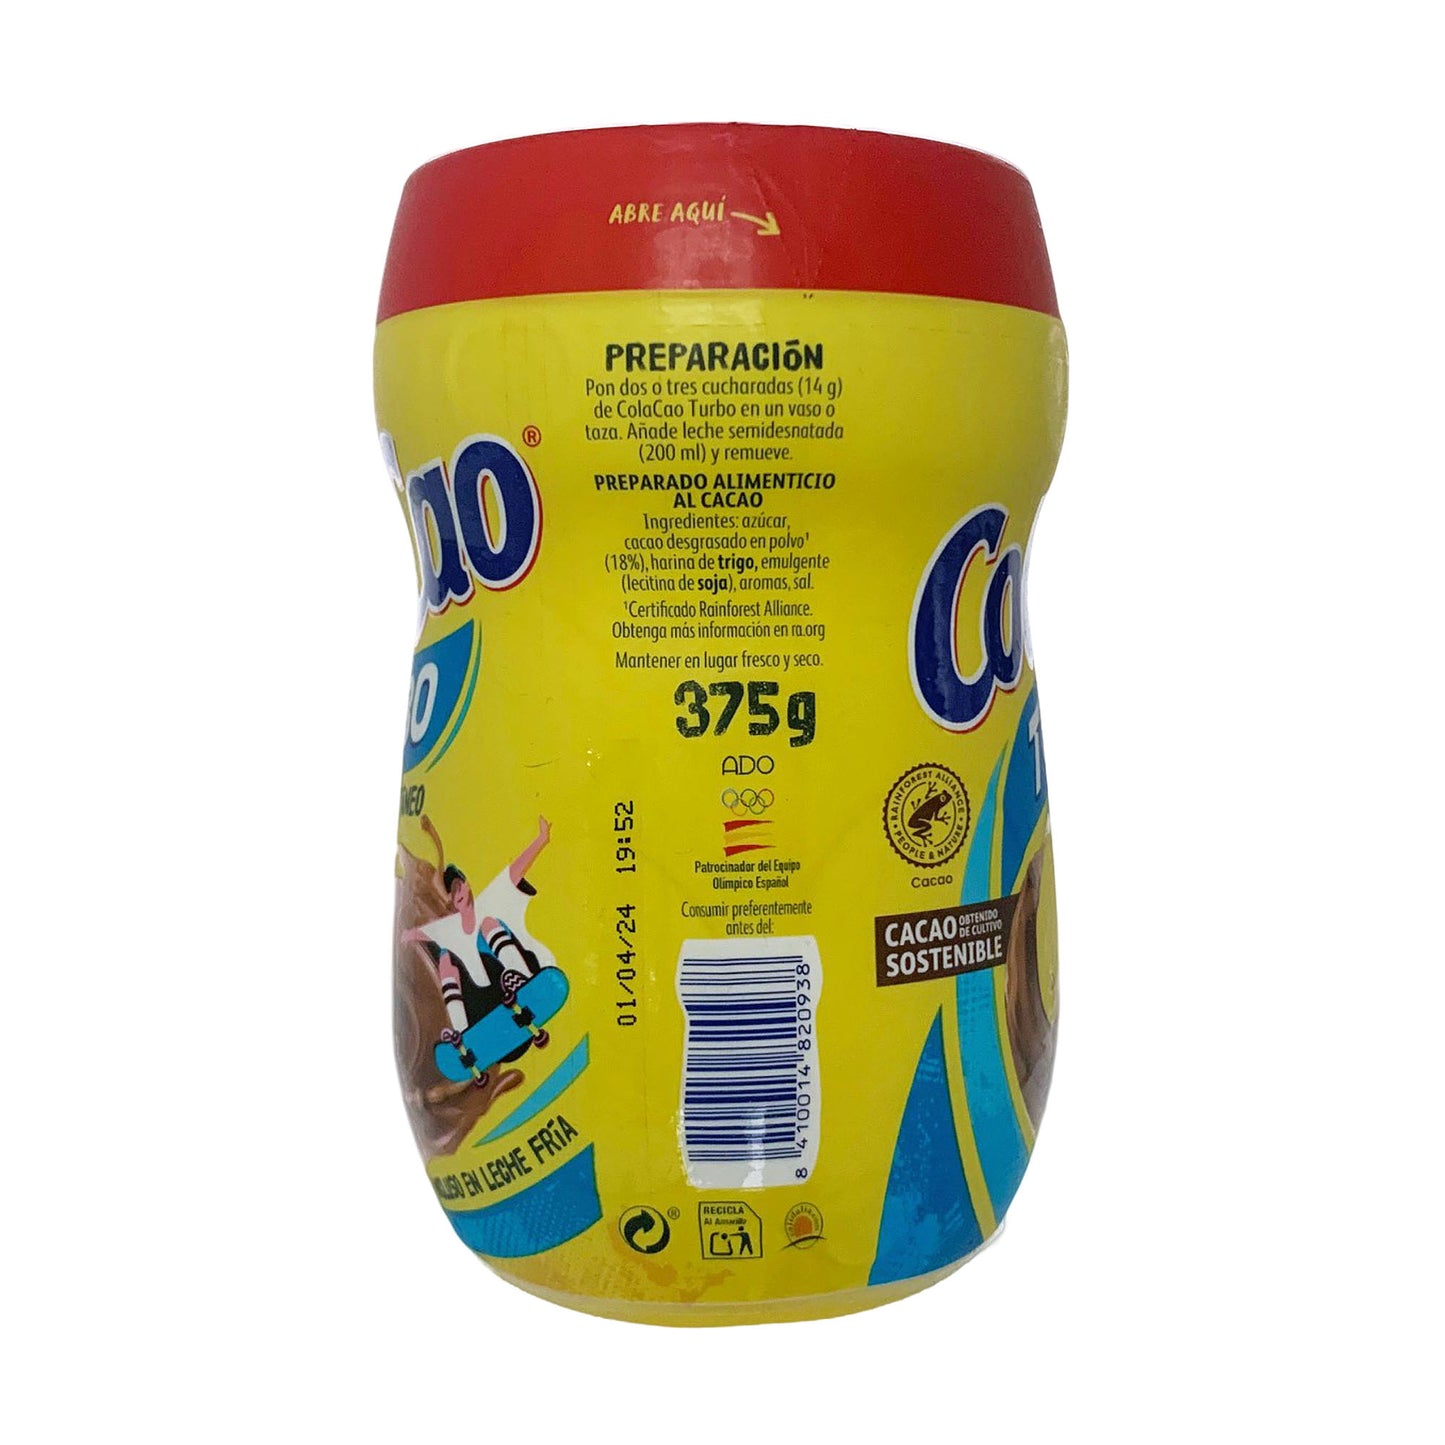 ColaCao Turbo Instant Hot or Cold Chocolate Drink Mix from Spain 375g